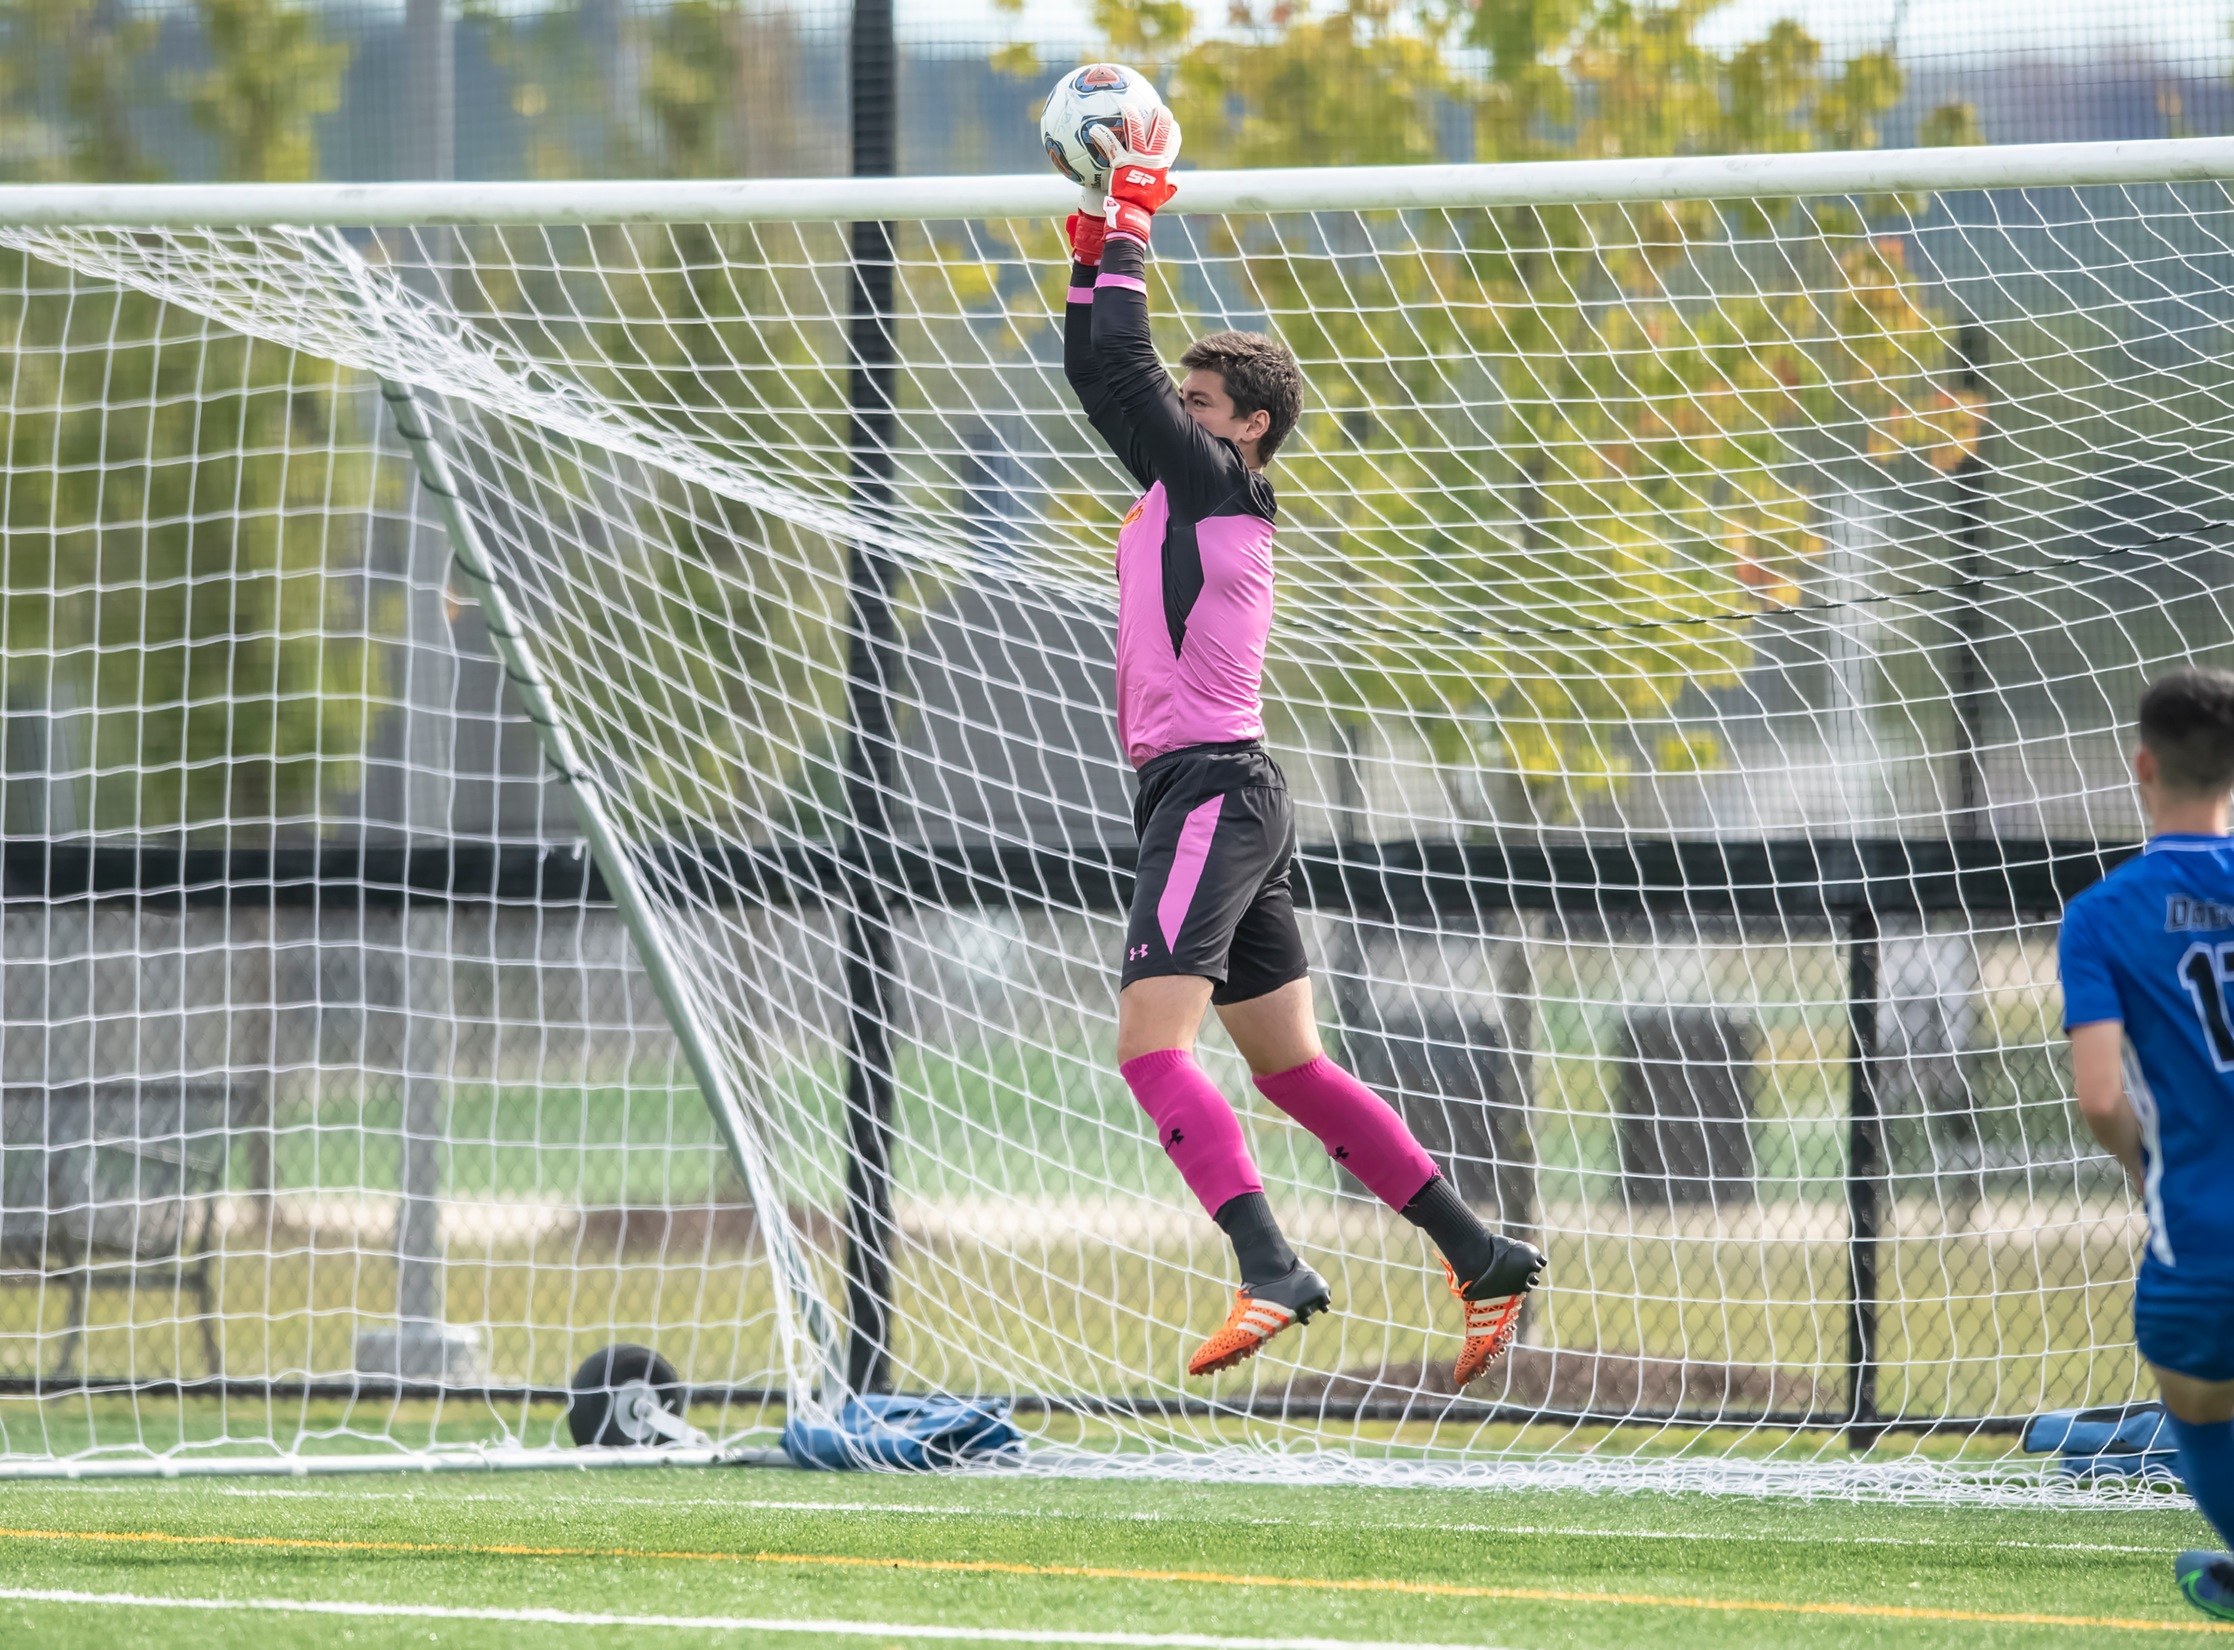 Javier Abadia made two quality saves to keep Mercy scoreless in a double OT tie.